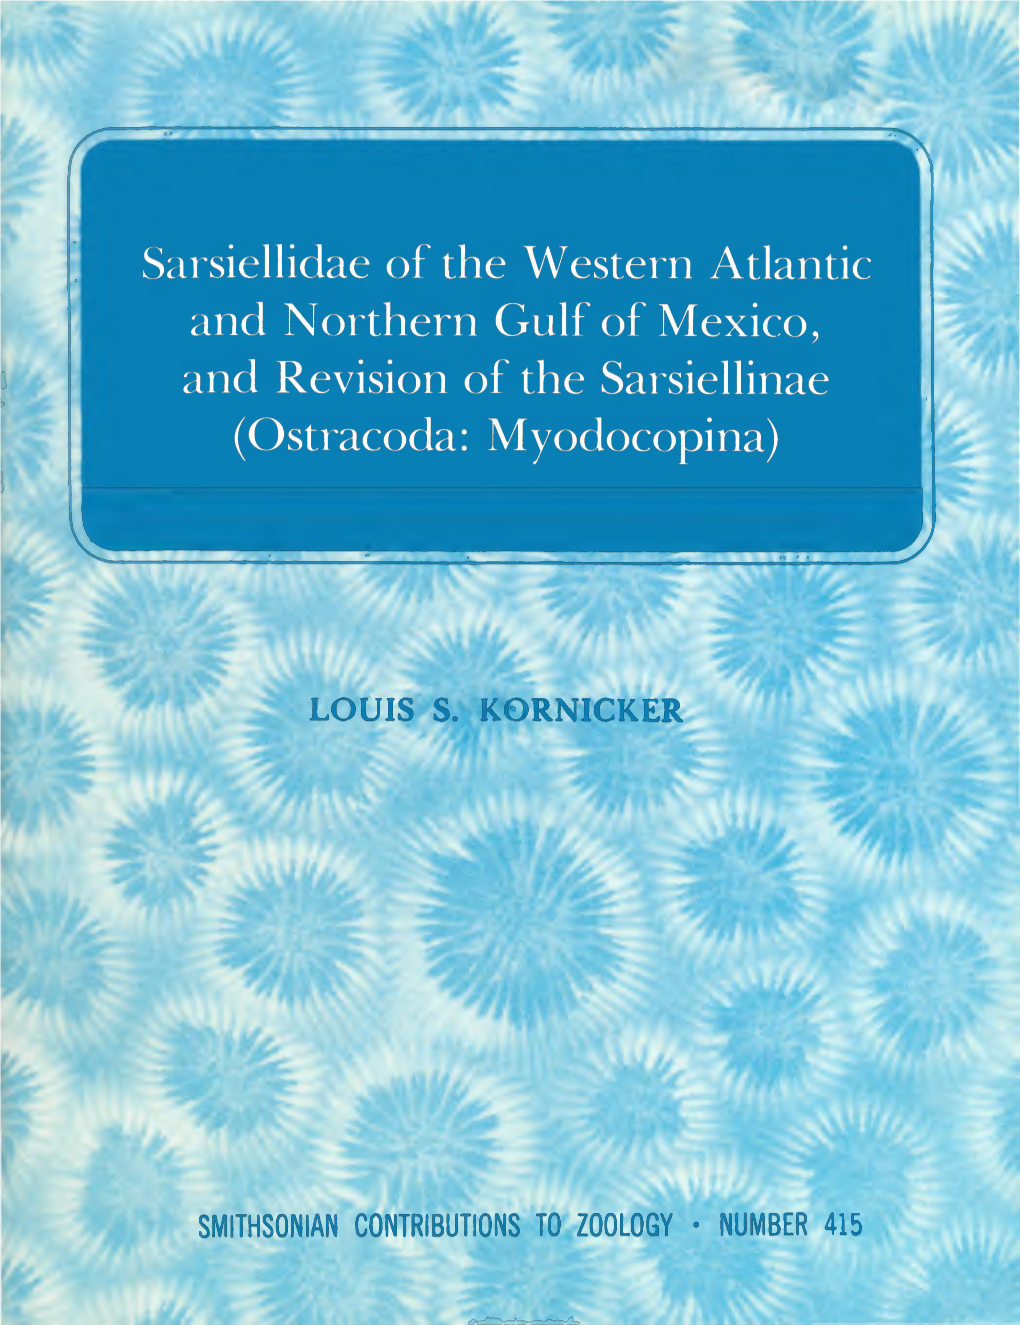 Sarsiellidae of the Western Atlantic and Northern Gulf of Mexico, and Revision of the Sarsiellinae (Ostracoda: Myodocopina)